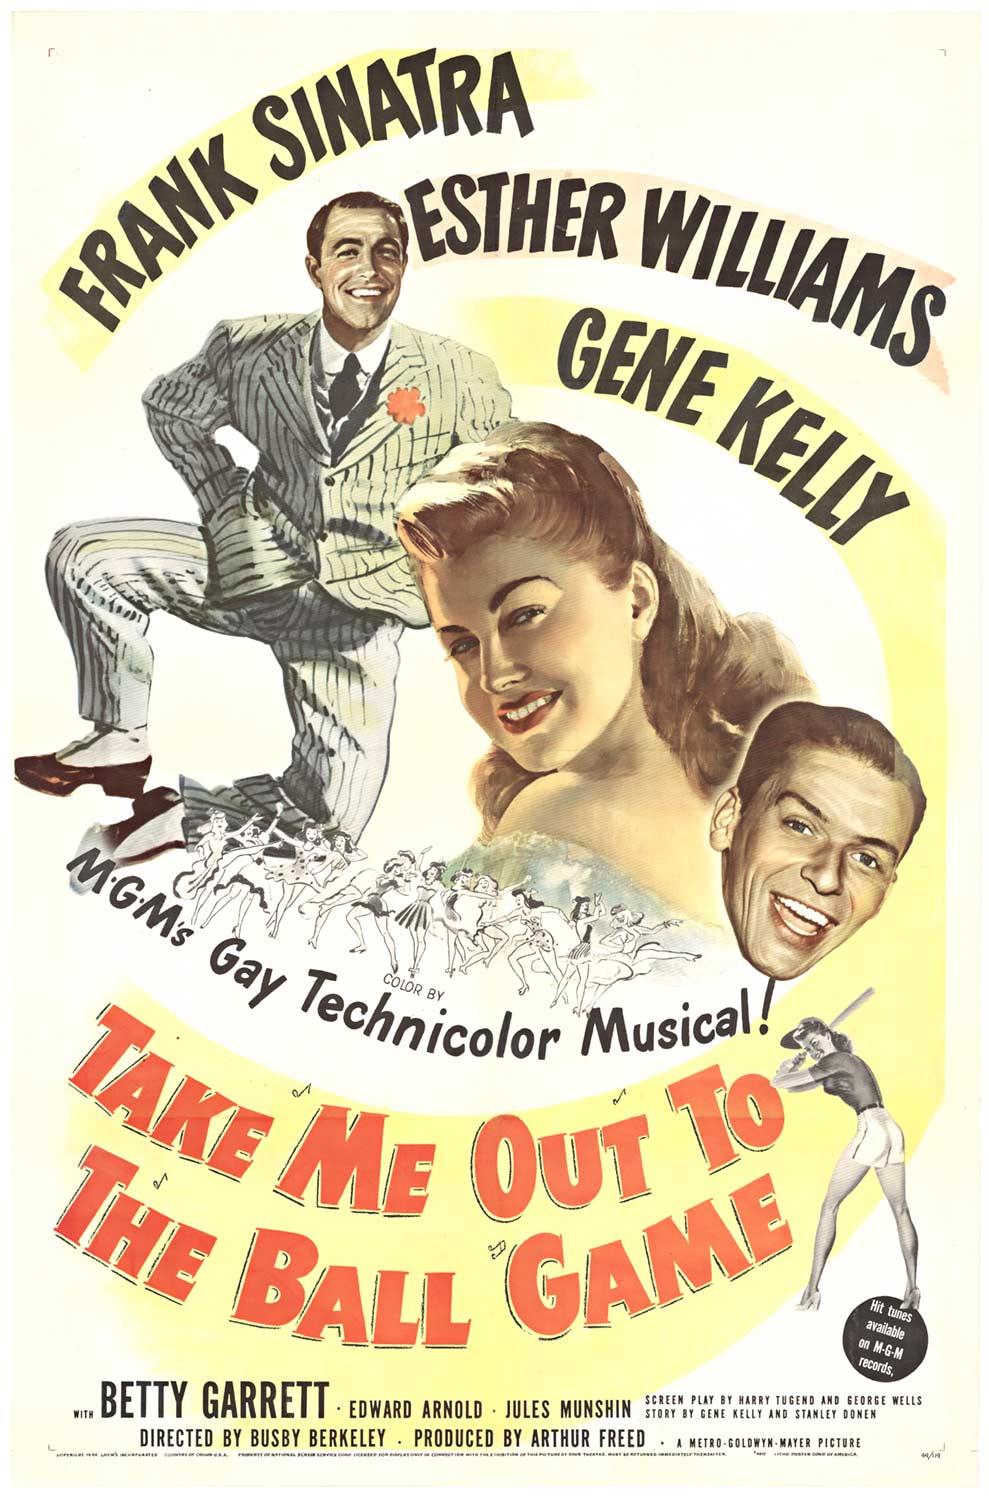 Unknown Portrait Print - Original "Take Me Out to the Ball Game" vintage 1949 movie poster